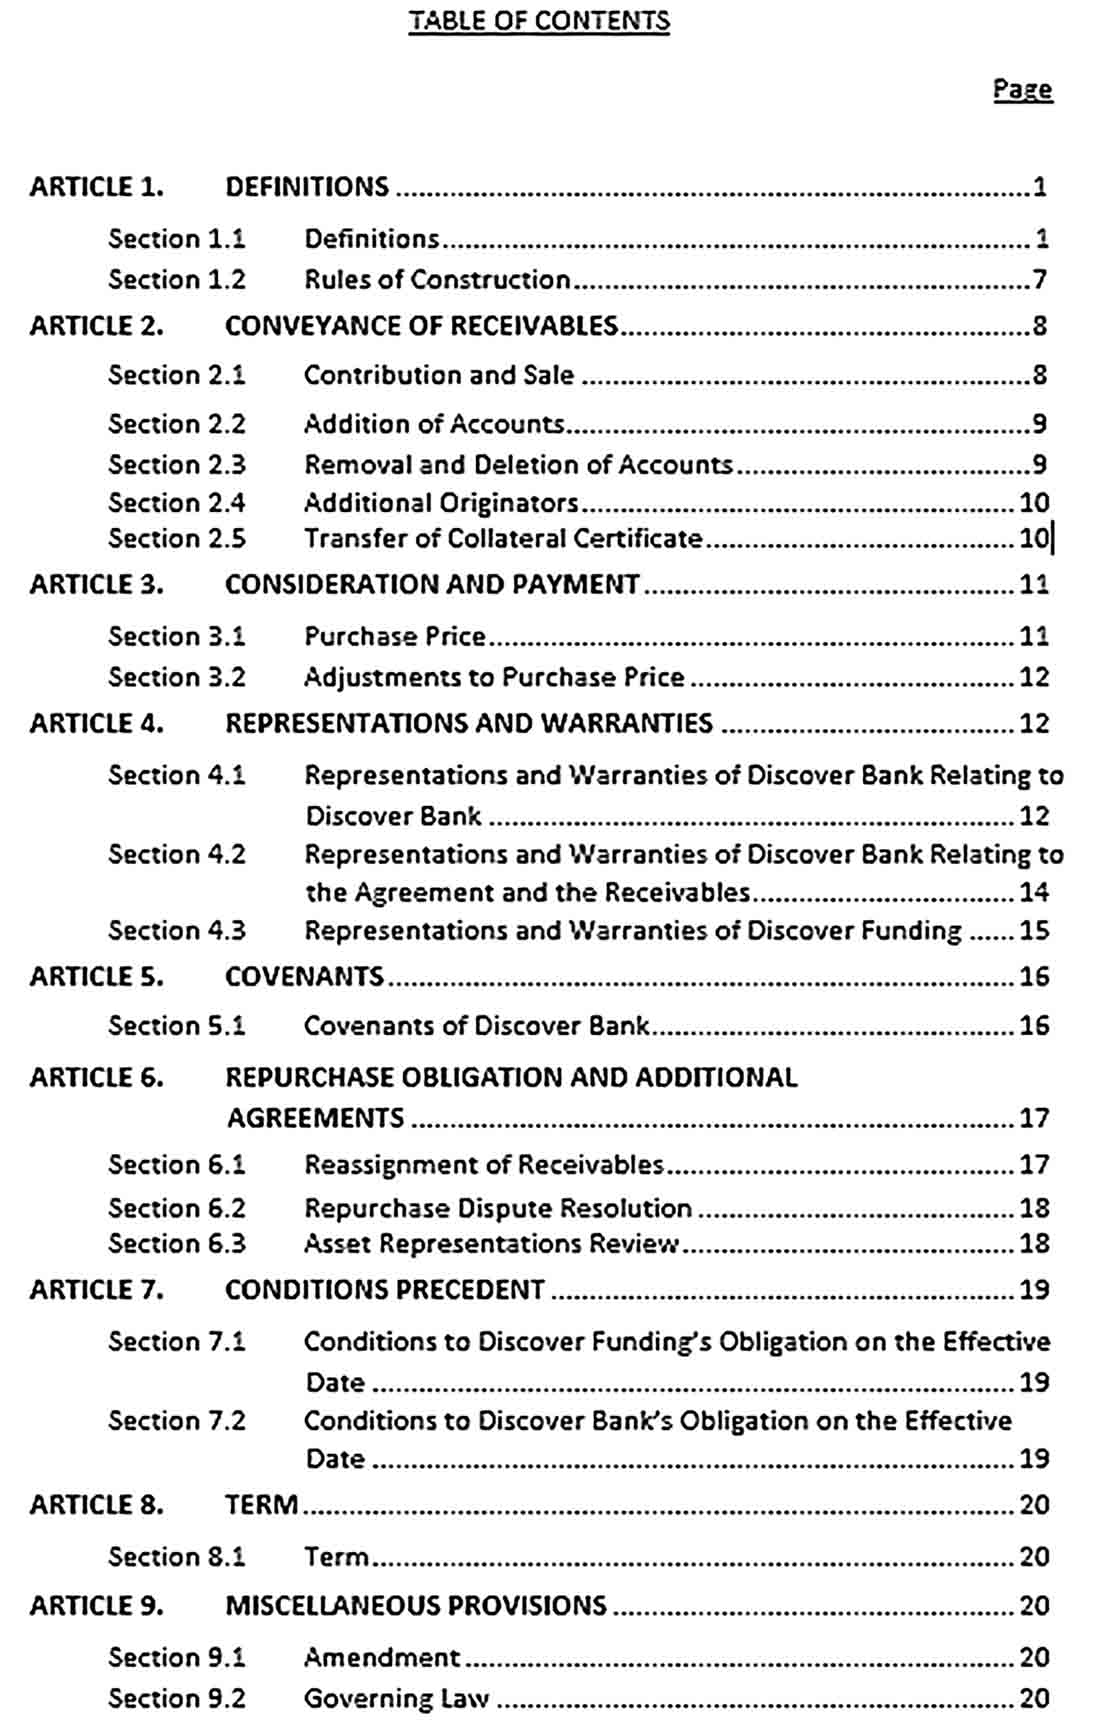 Sample Receivable Sales and Contribution Agreement